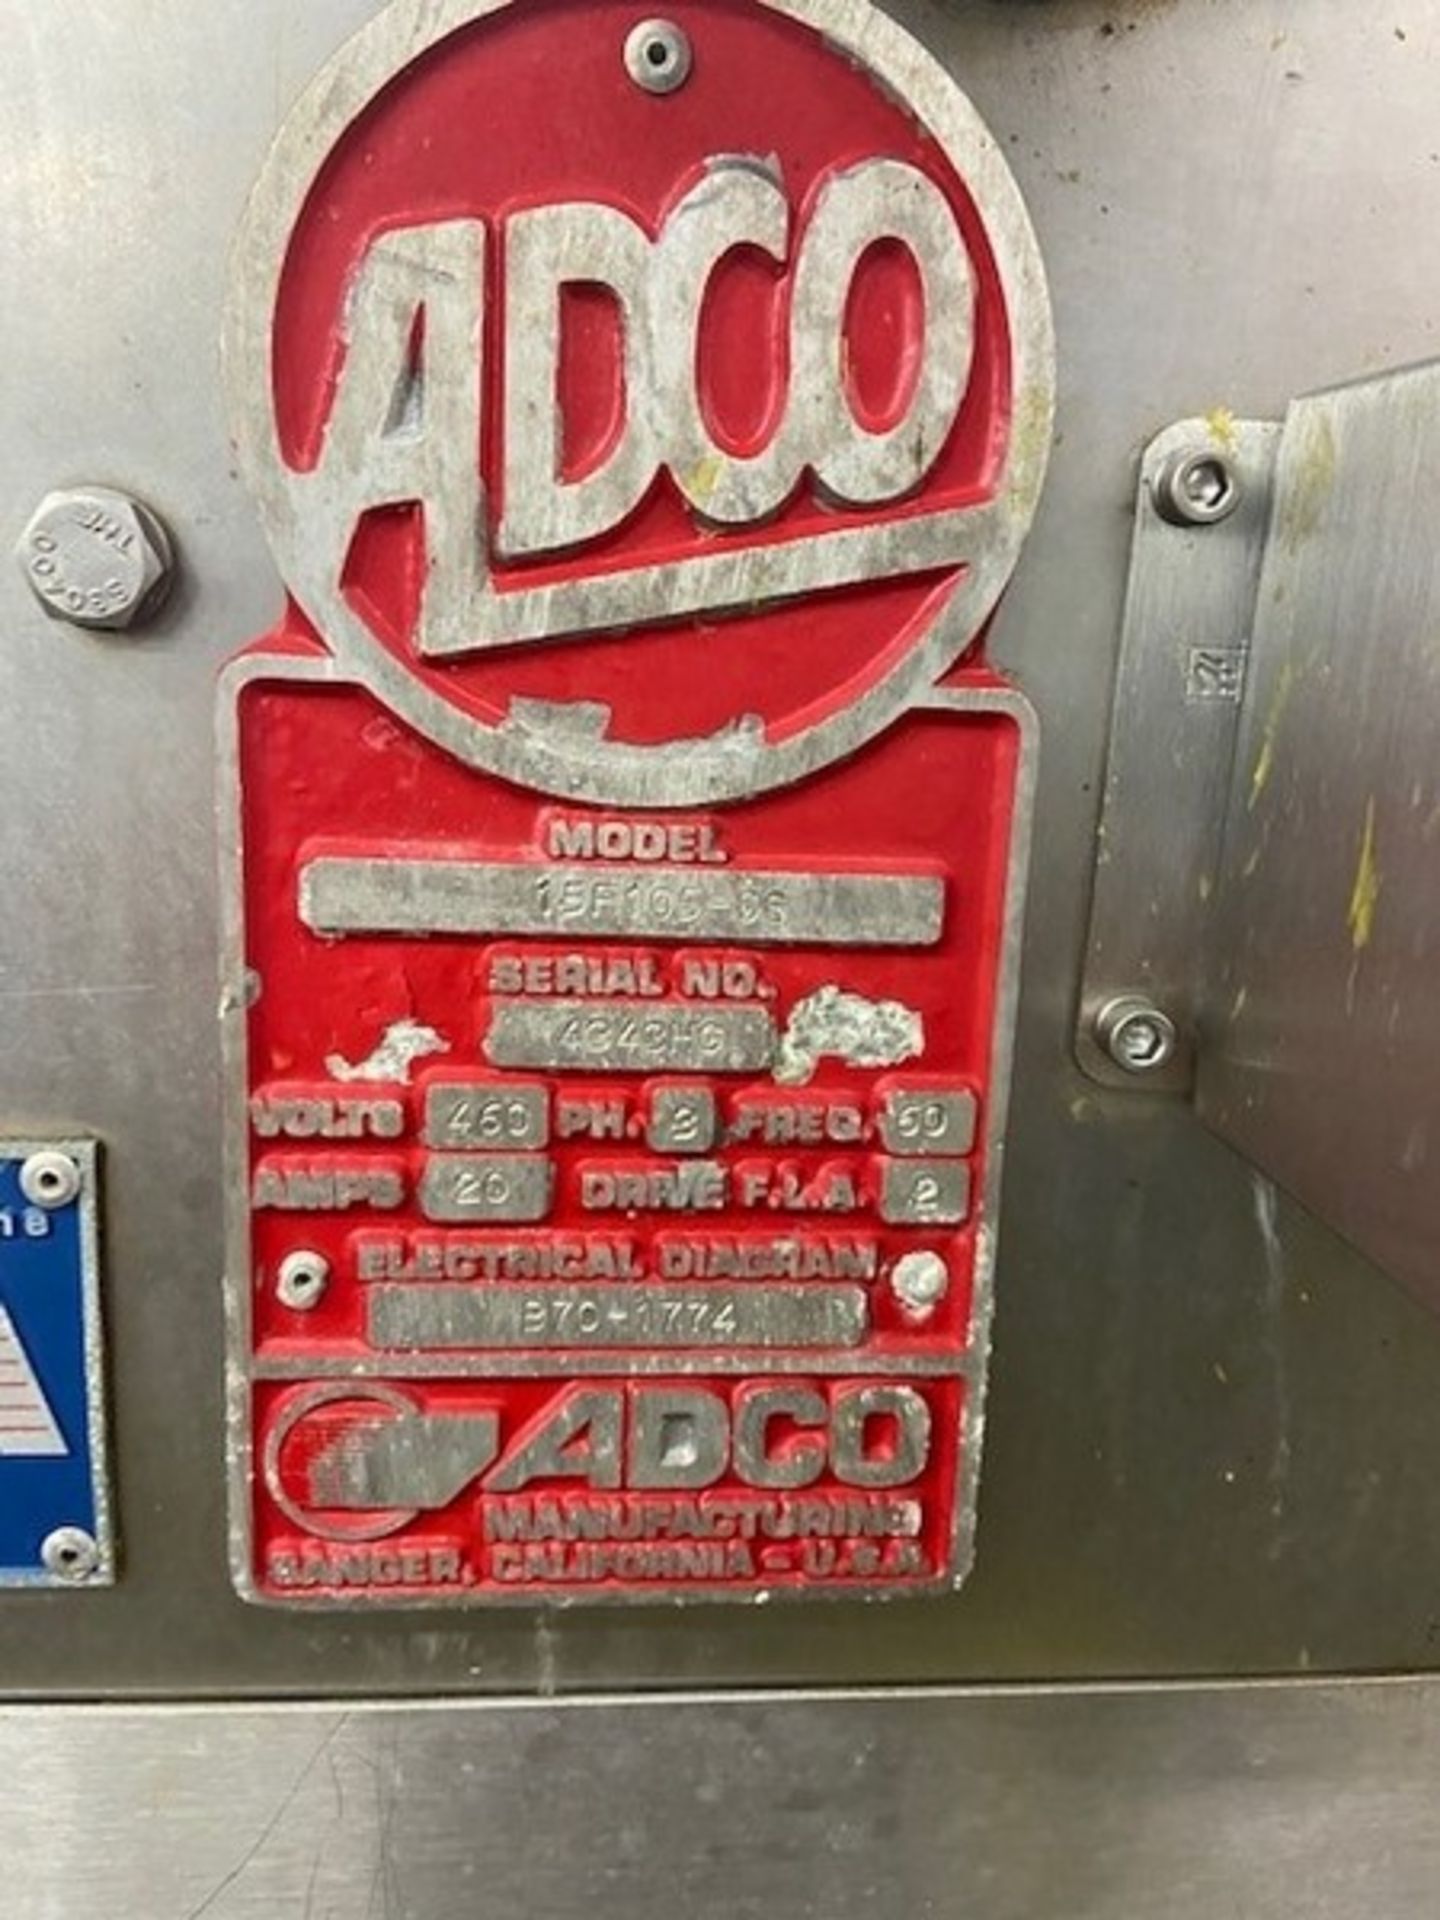 Adco Cartoner, Model 15F105-DS, S/N 4G43HG, 460 Volts, 3 Phase (Located Fort Atkinson, WI) - Image 2 of 14